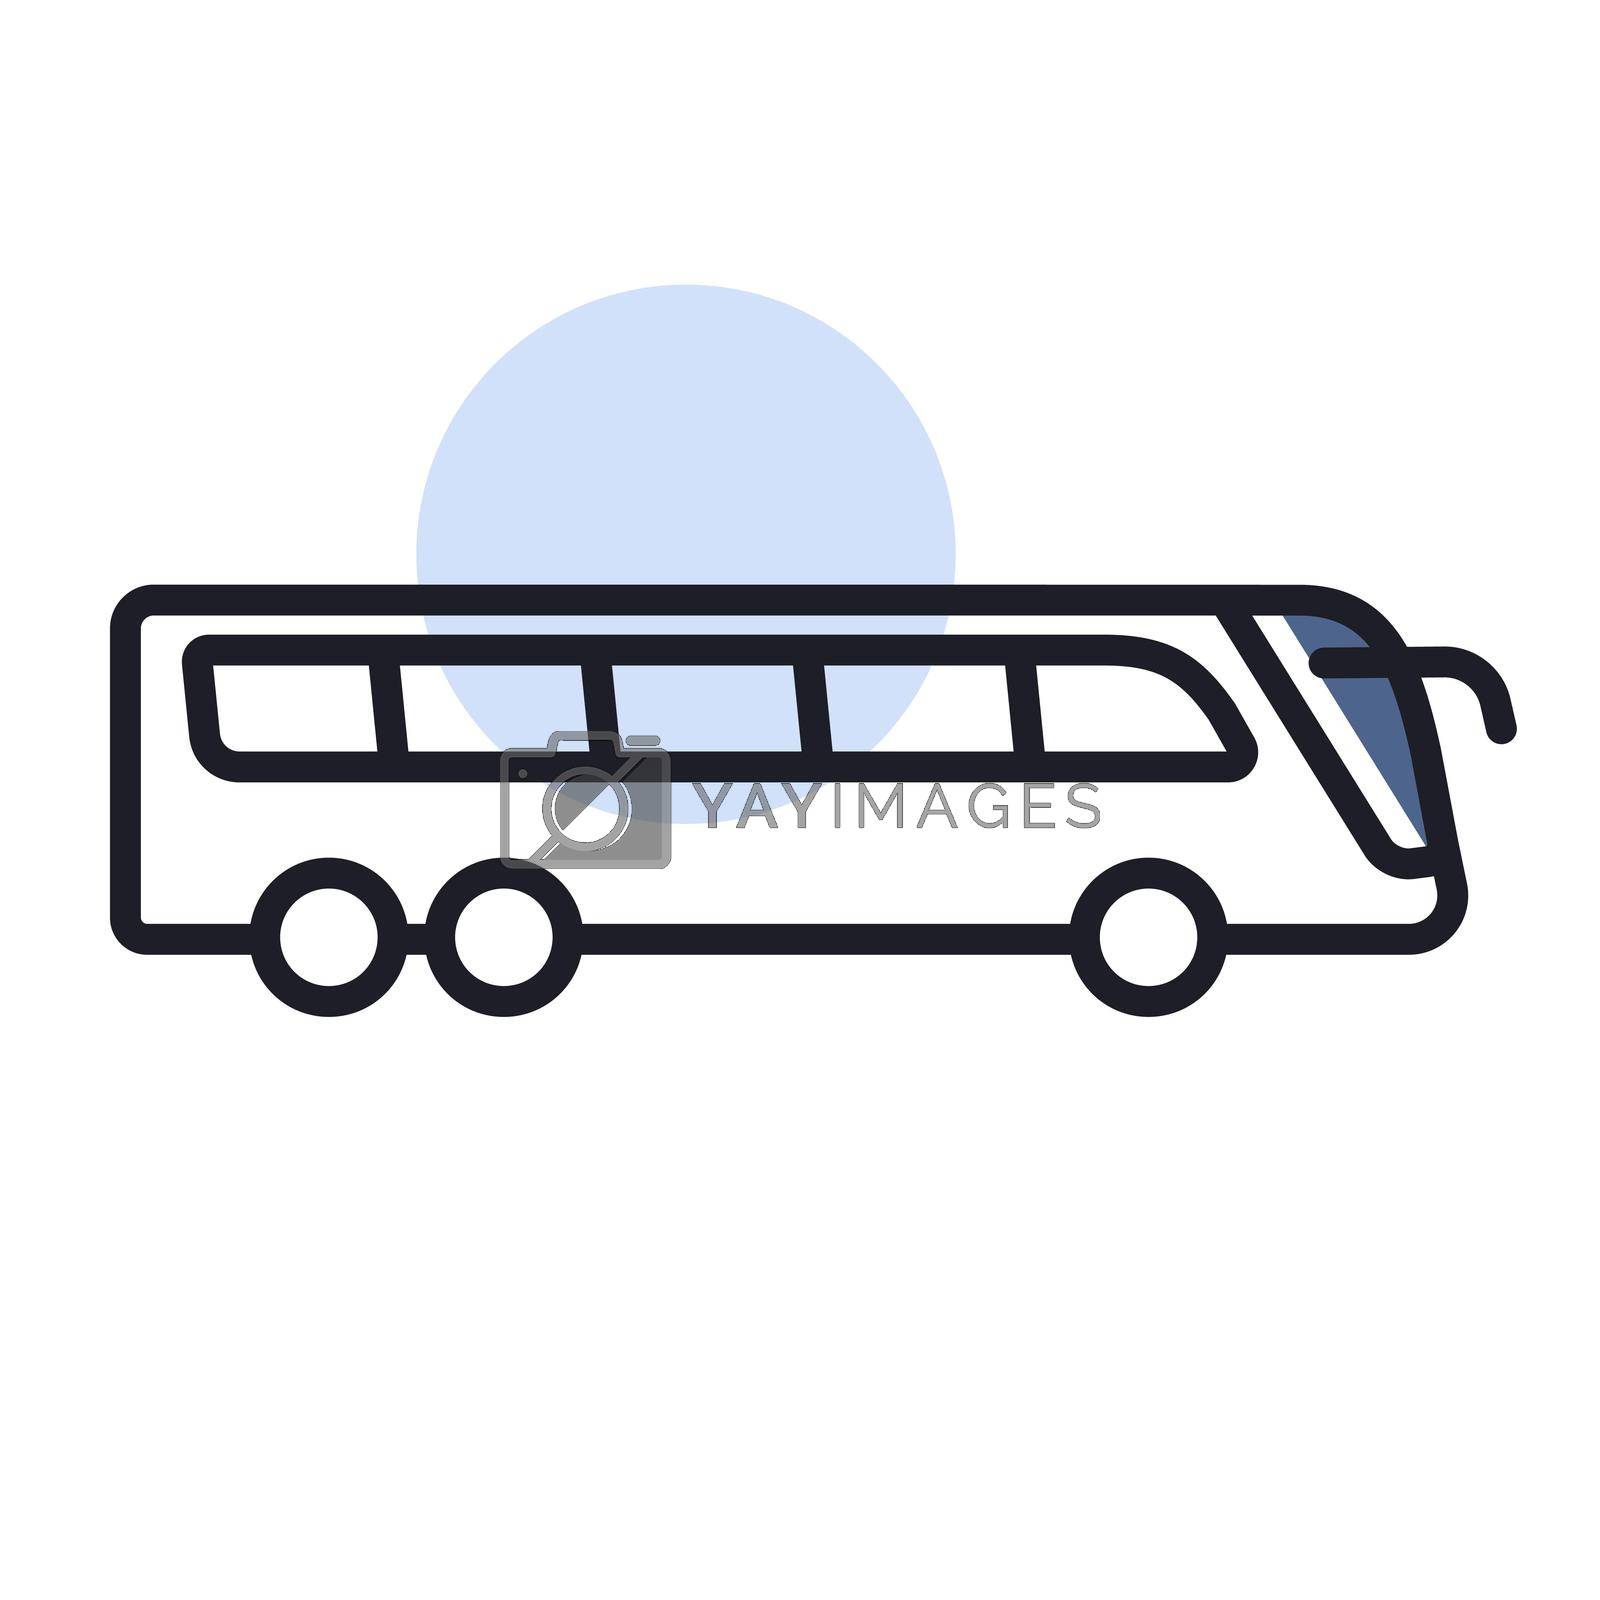 Royalty free image of Travel bus flat vector isolated icon by nosik